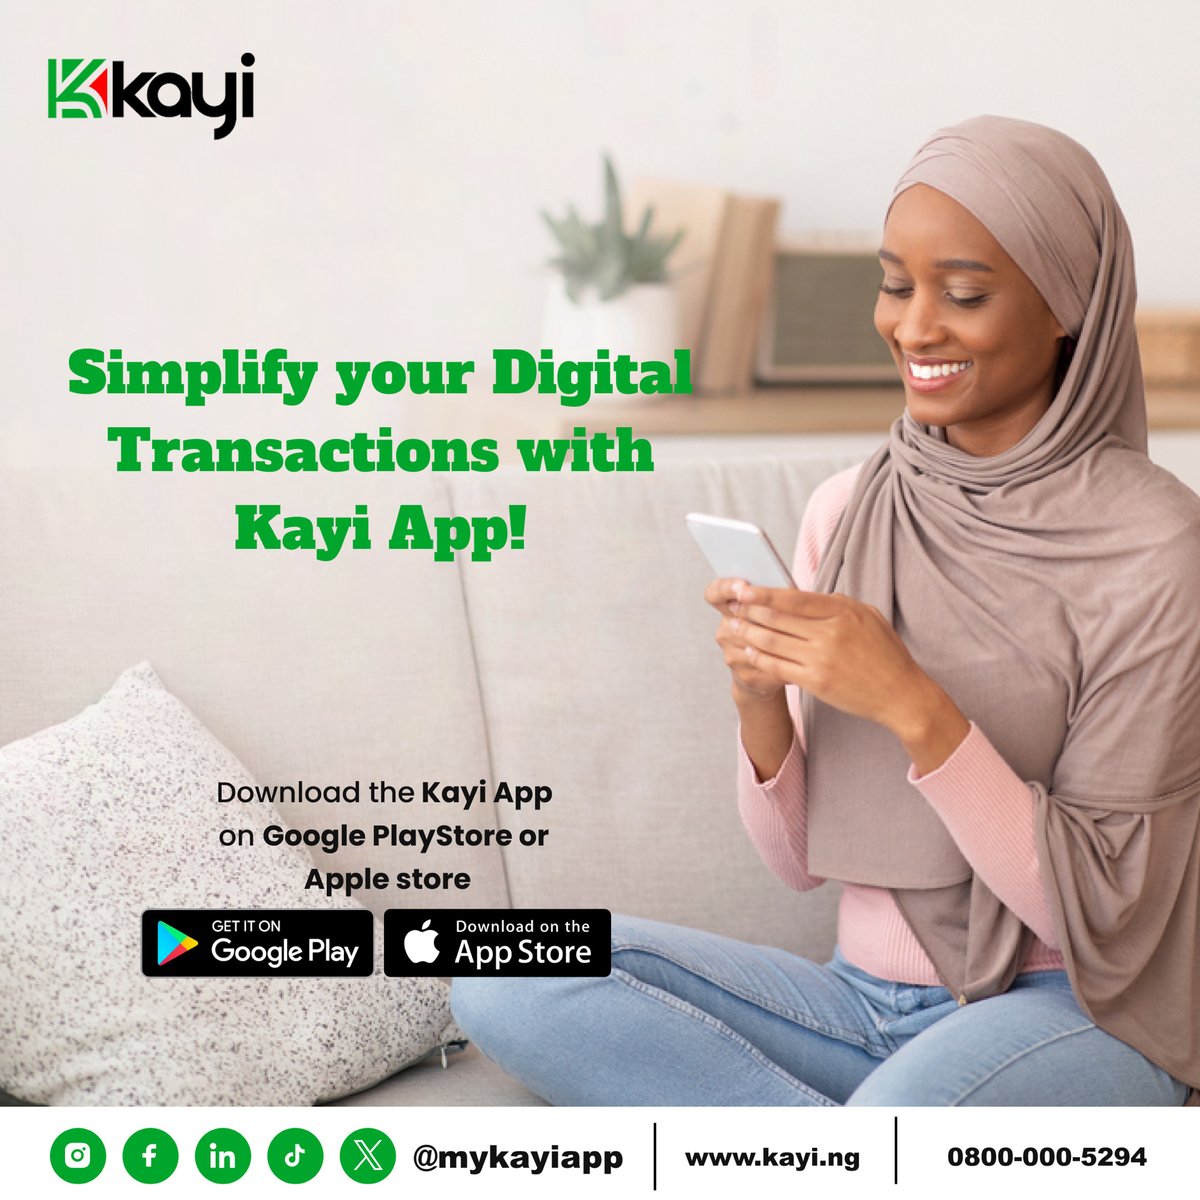 MyKayiApp is now available anywhere. Simplify your transactions. Download MyKayiApp now on Google Store or Apple Store. Empower your financial journey with ease. 

#MyKayiApp #NowLive #Kayiway #DownloadNow #Bankingwithoutlimits #downloadmykayiapp